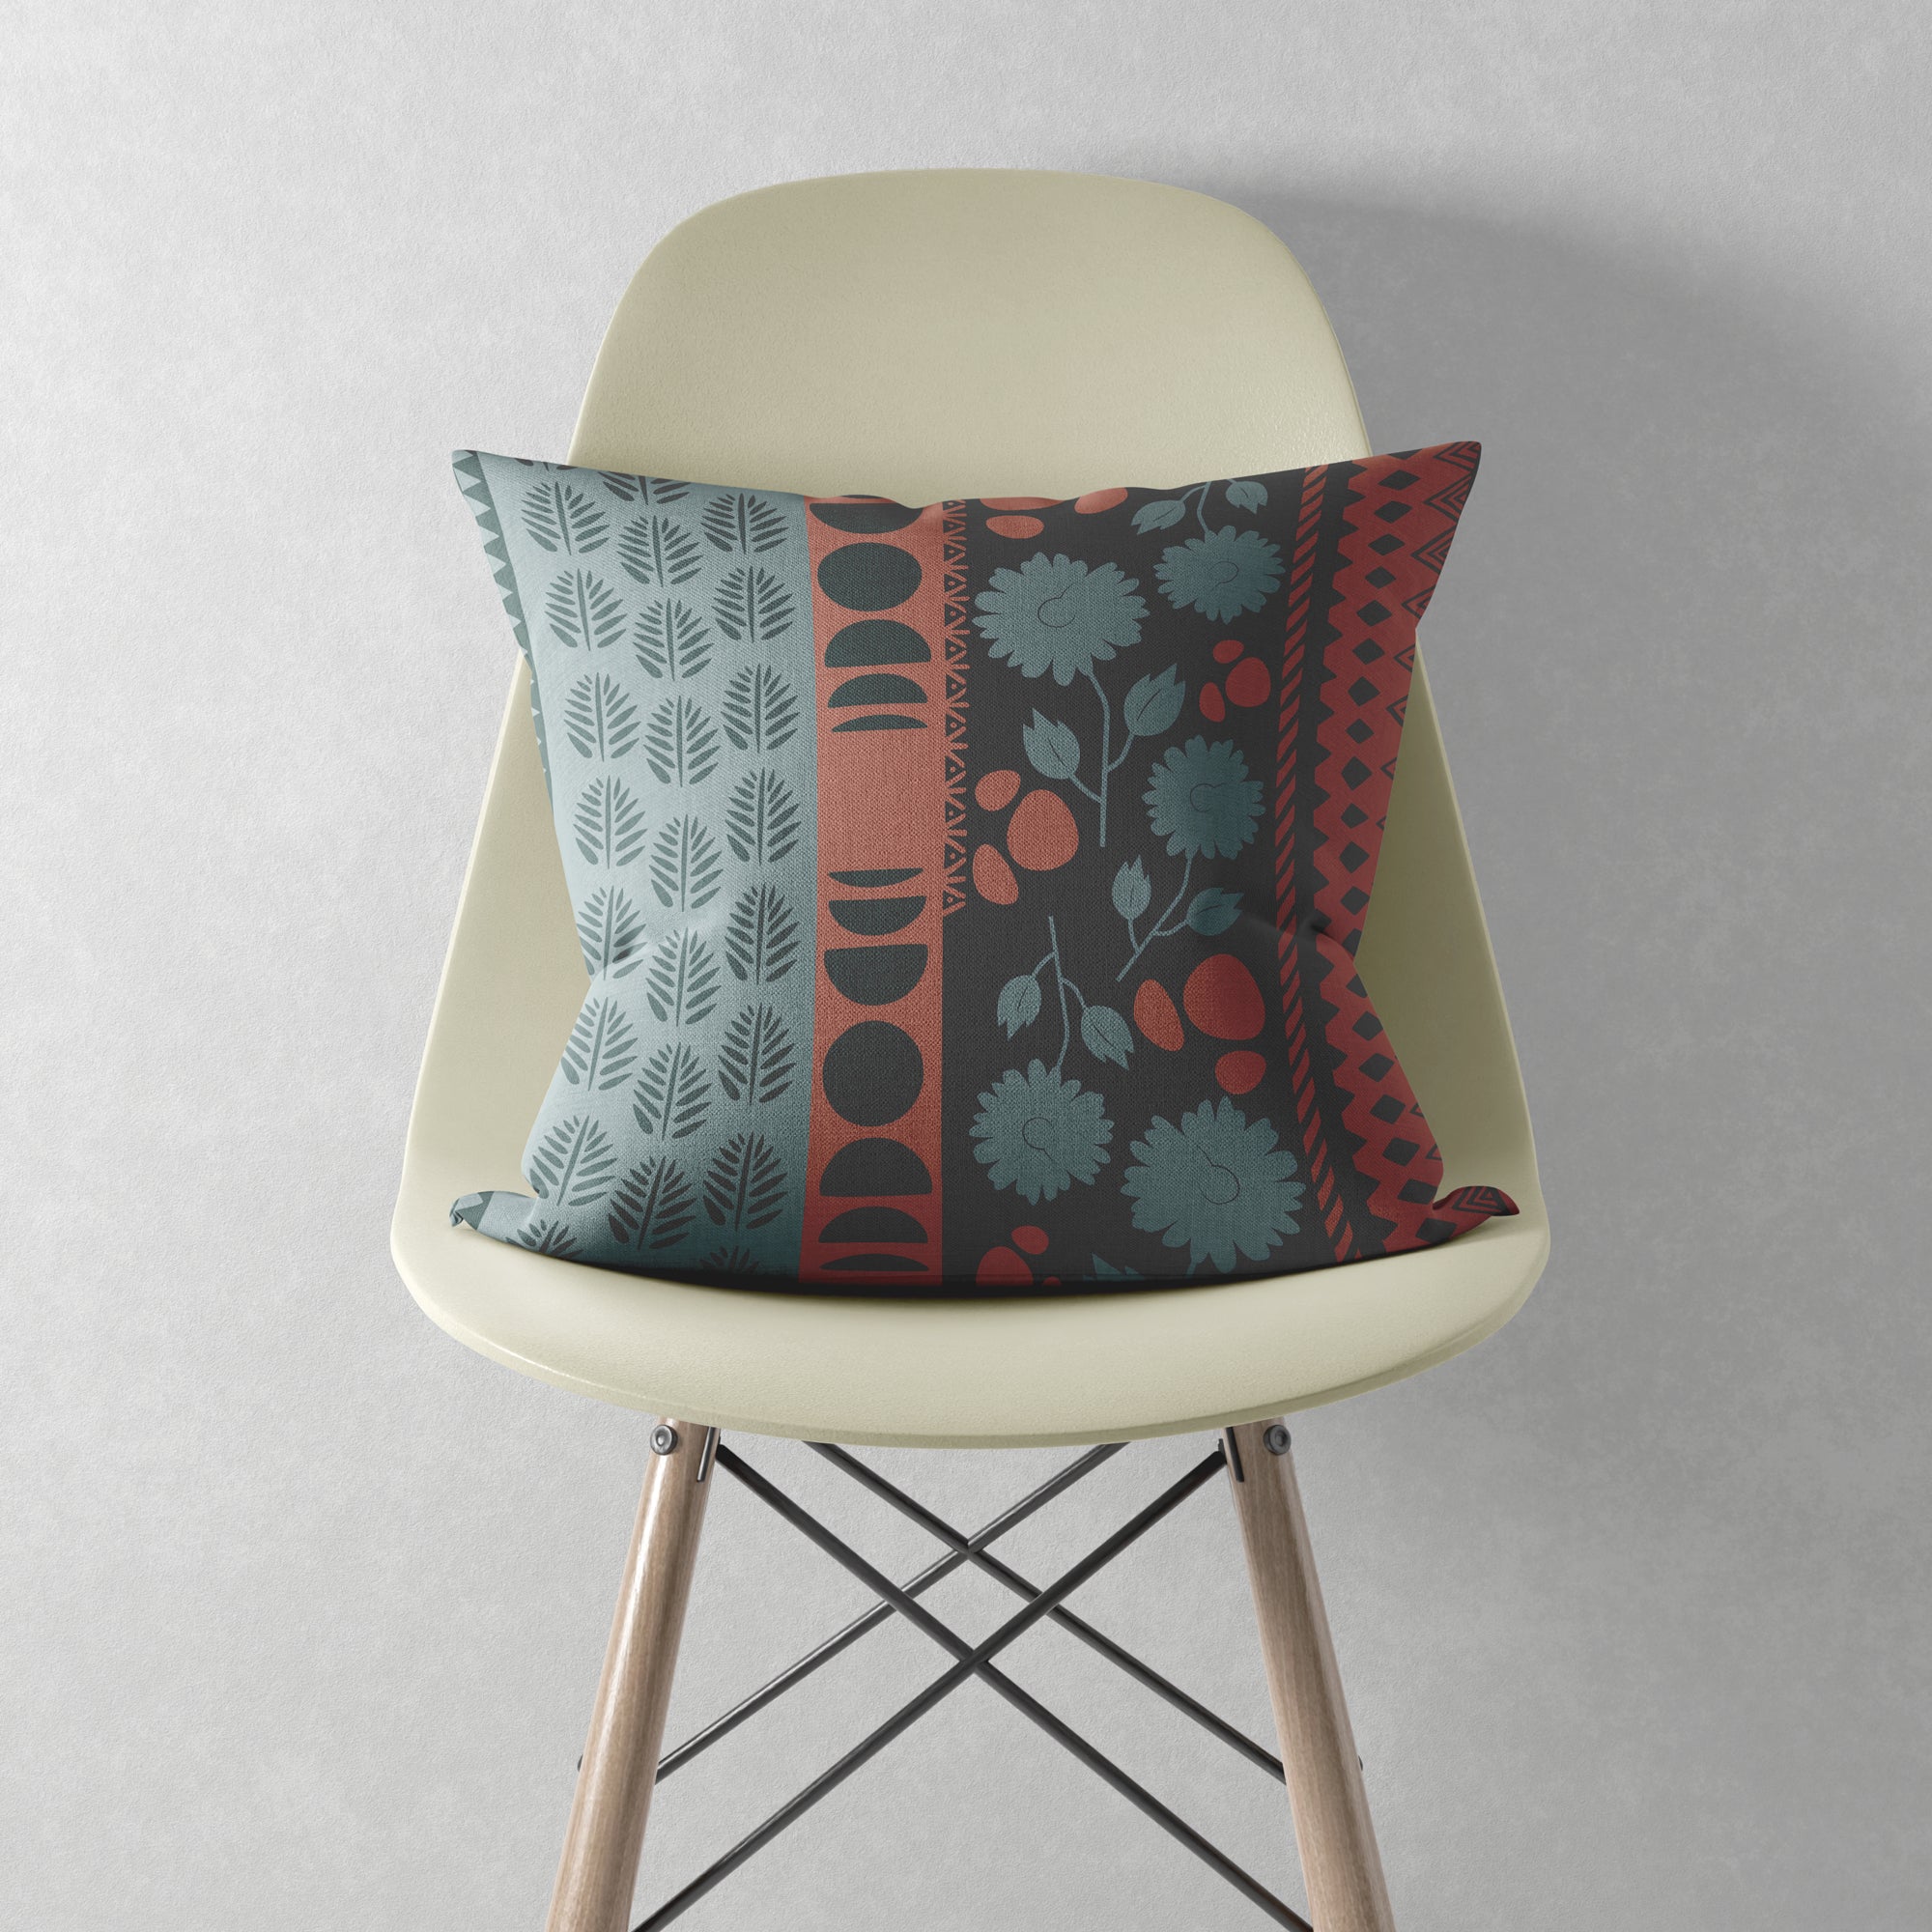 Midnight Glory Printed Pillow Cover